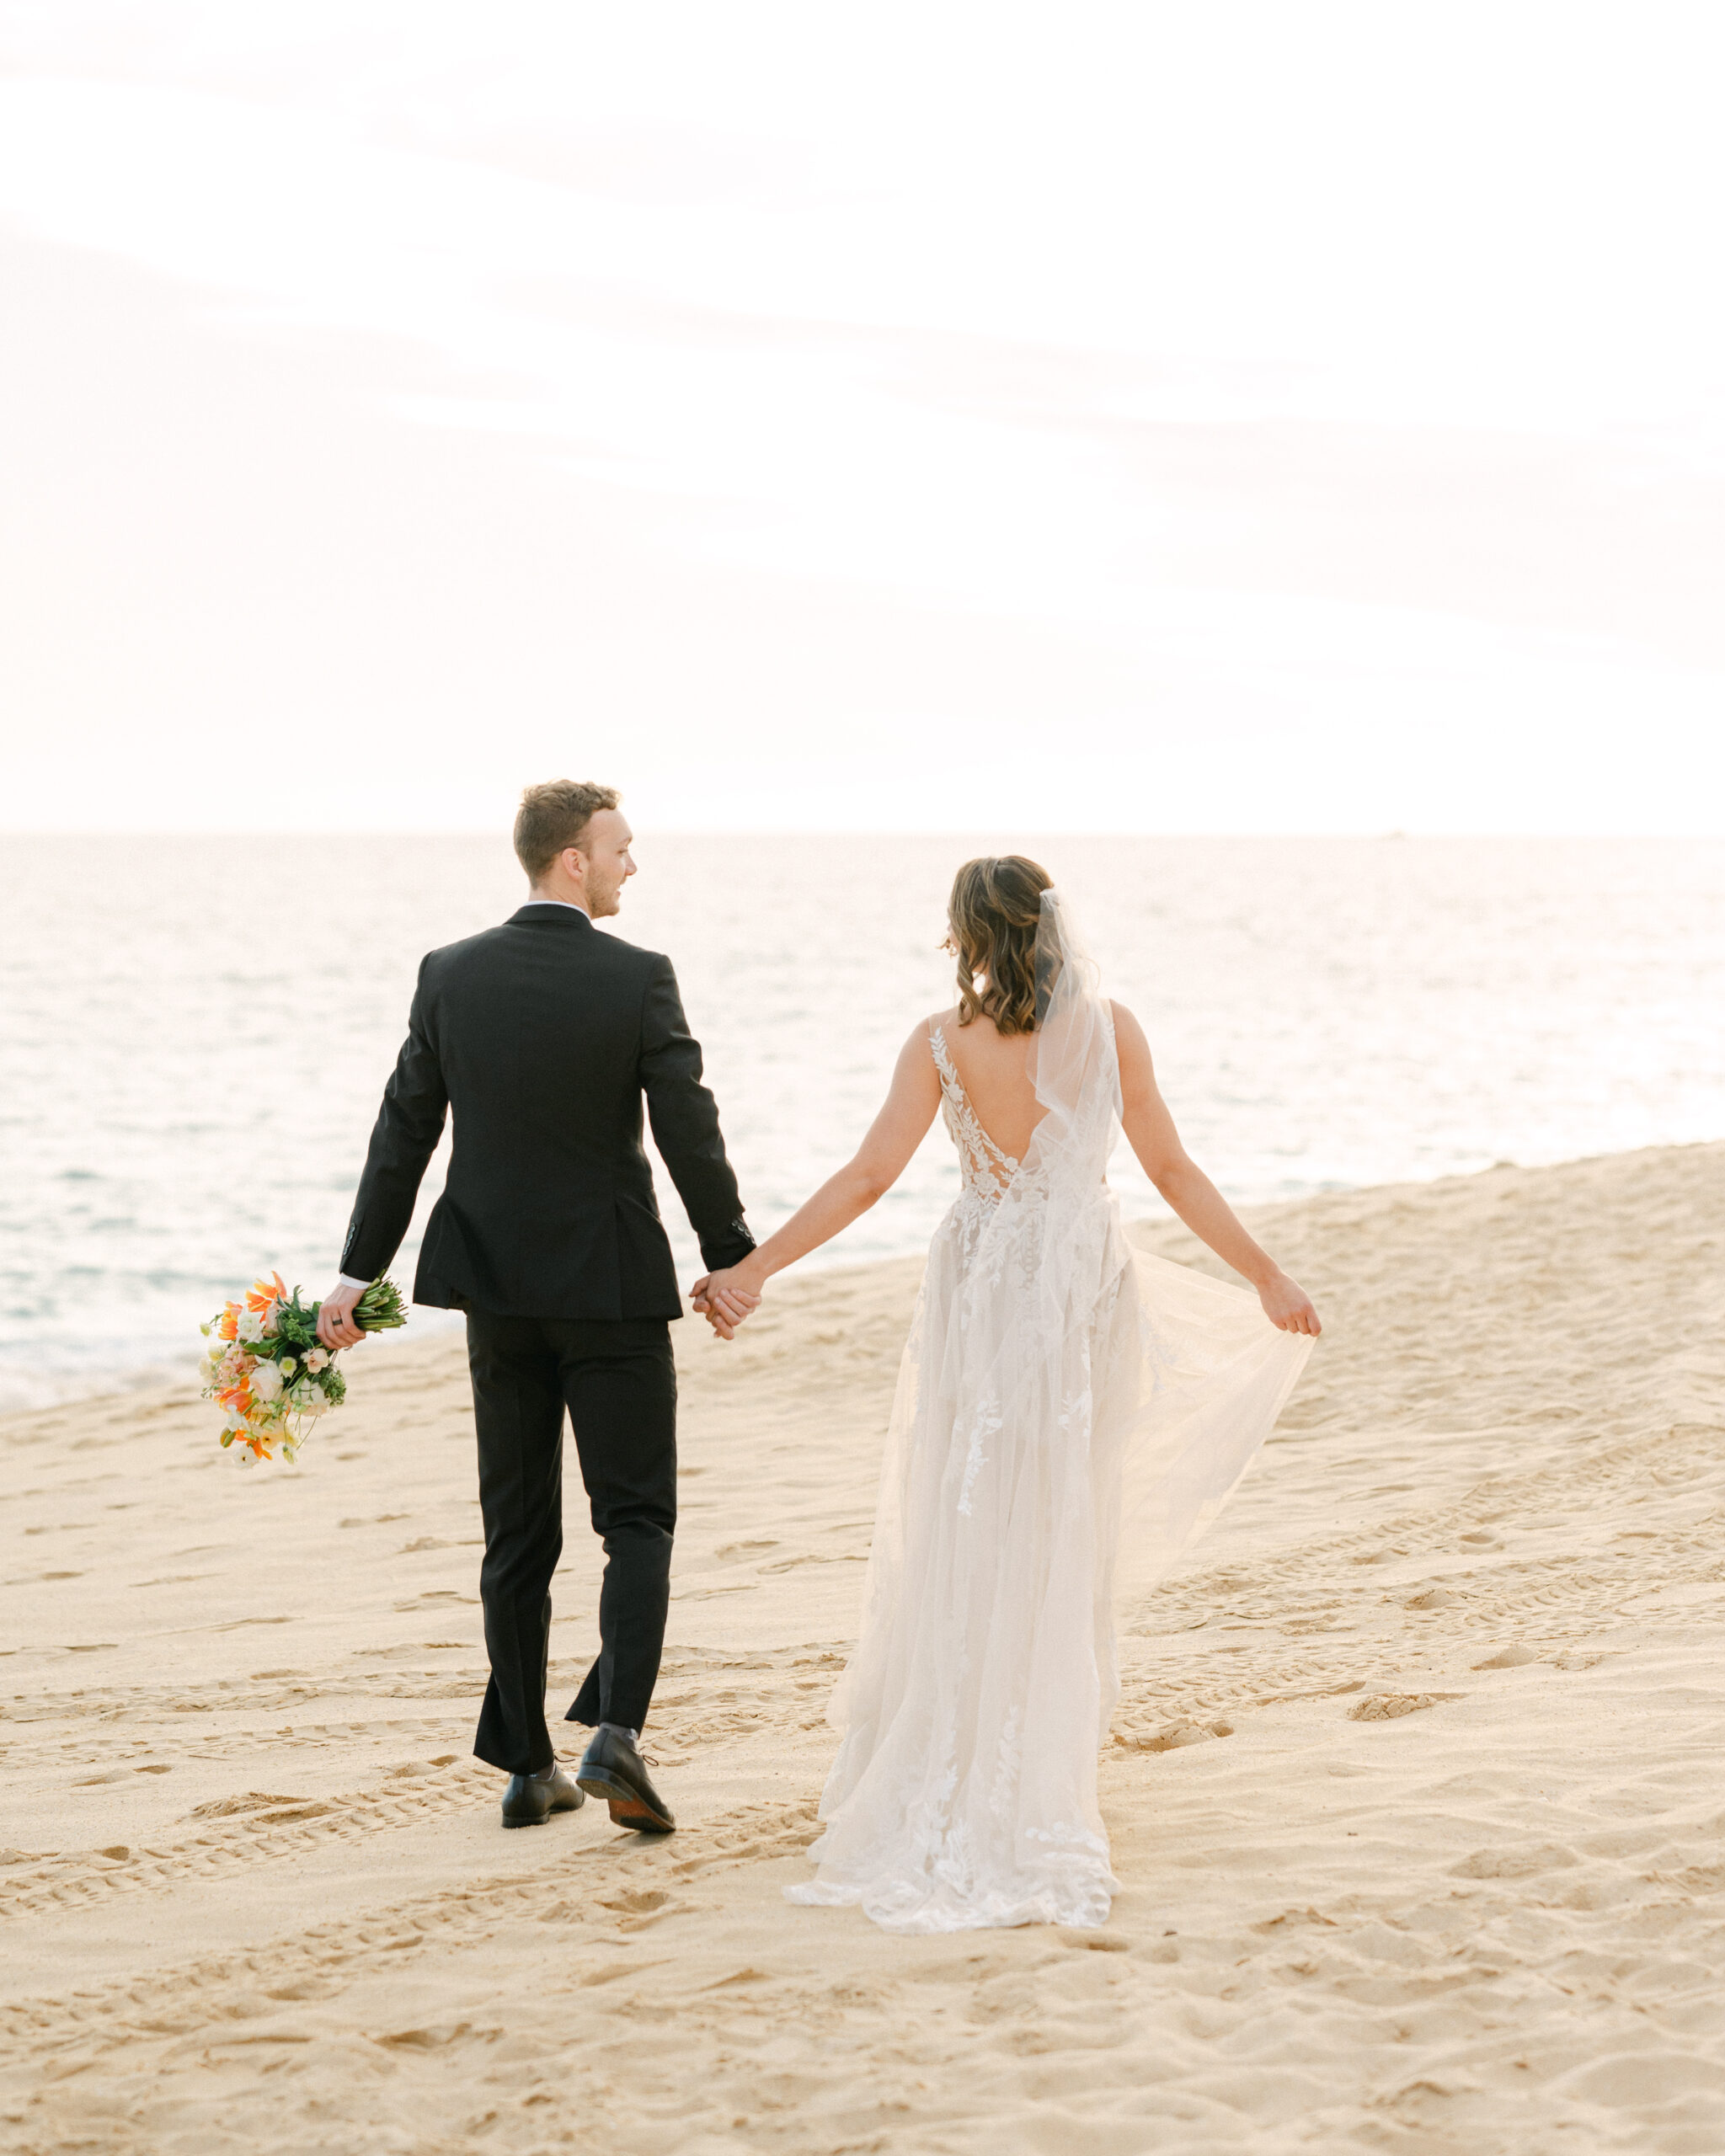 Romantic wedding weekend in Cabo bride and groom portrait on the beach at sunset. 